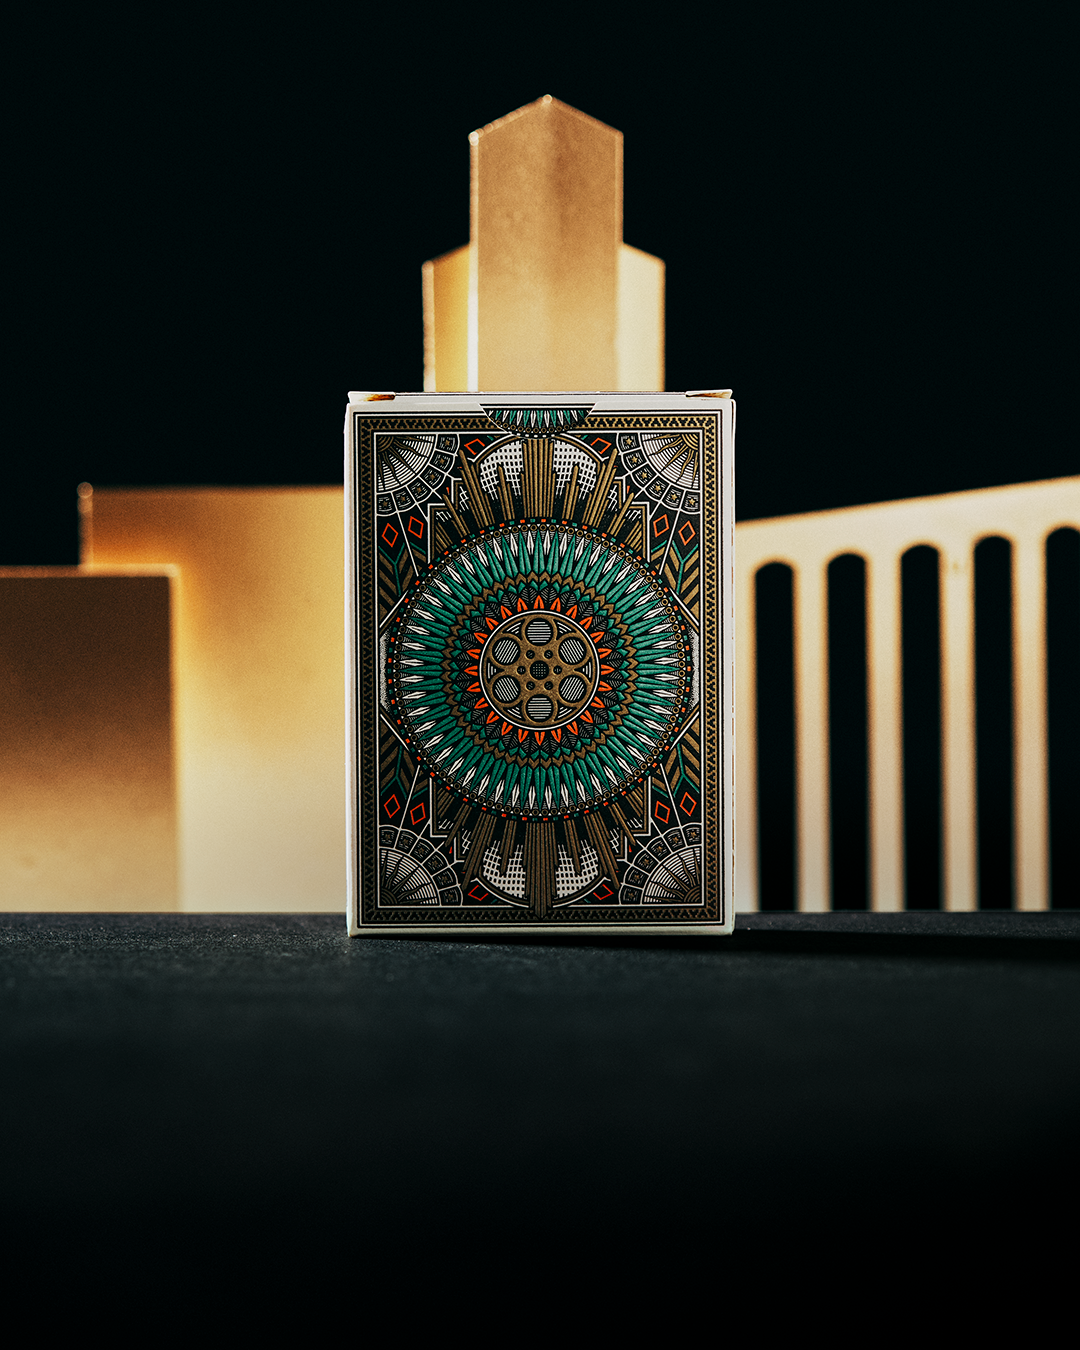 Cinematics Playing Cards